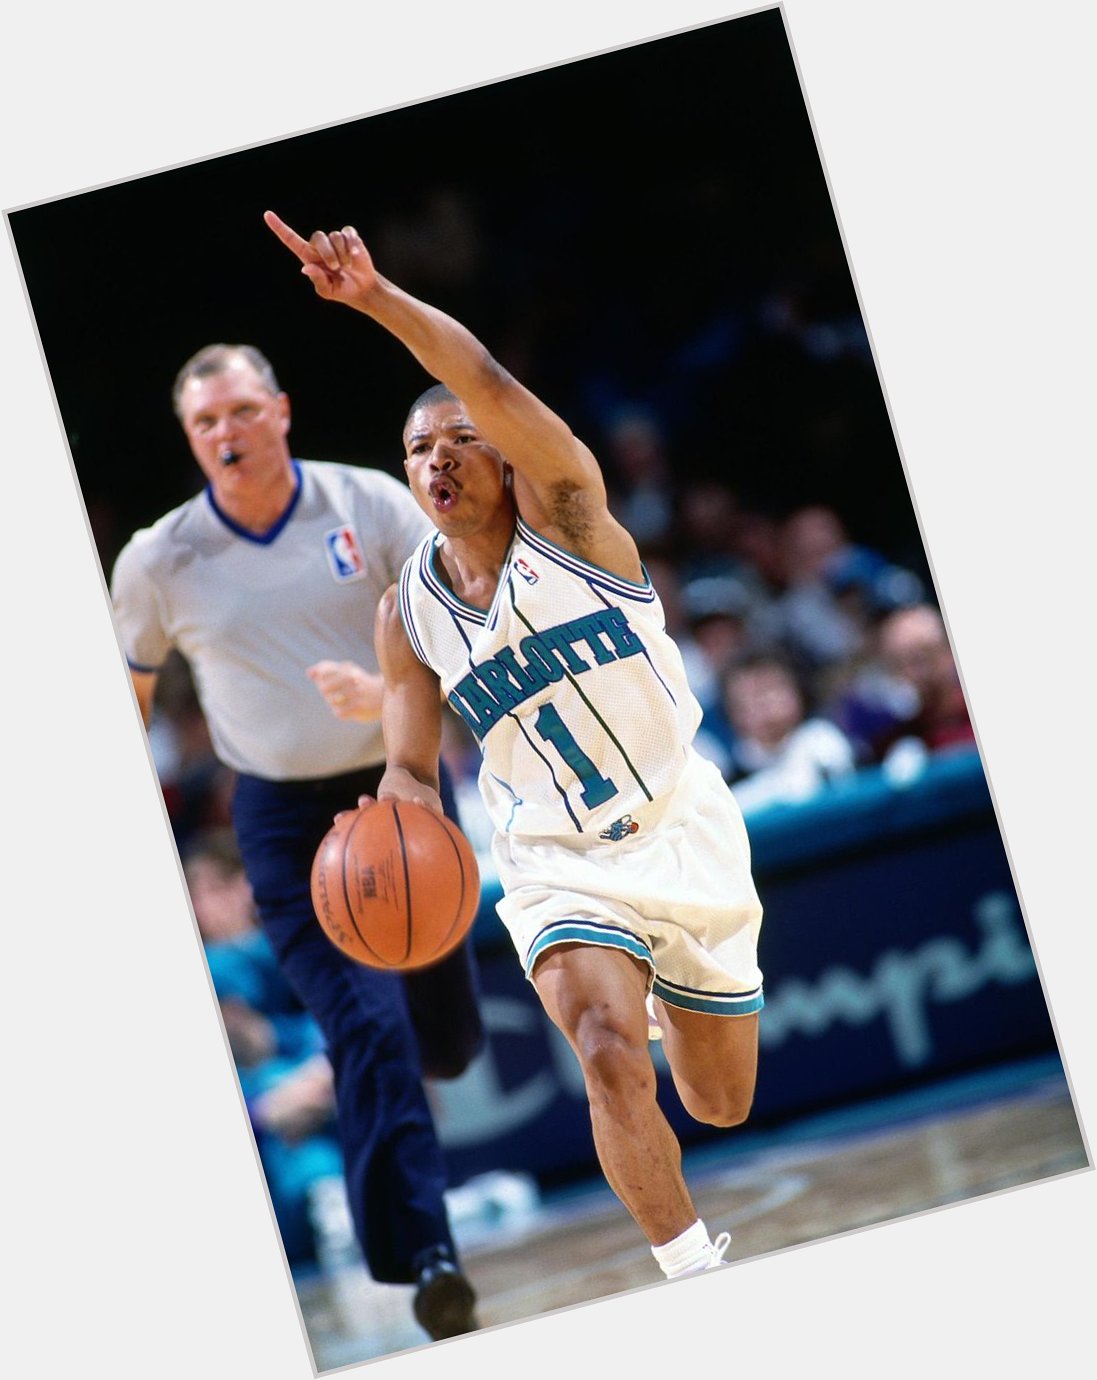 Everyone help us wish a HAPPY BIRTHDAY to Charlotte Hornets legend, 